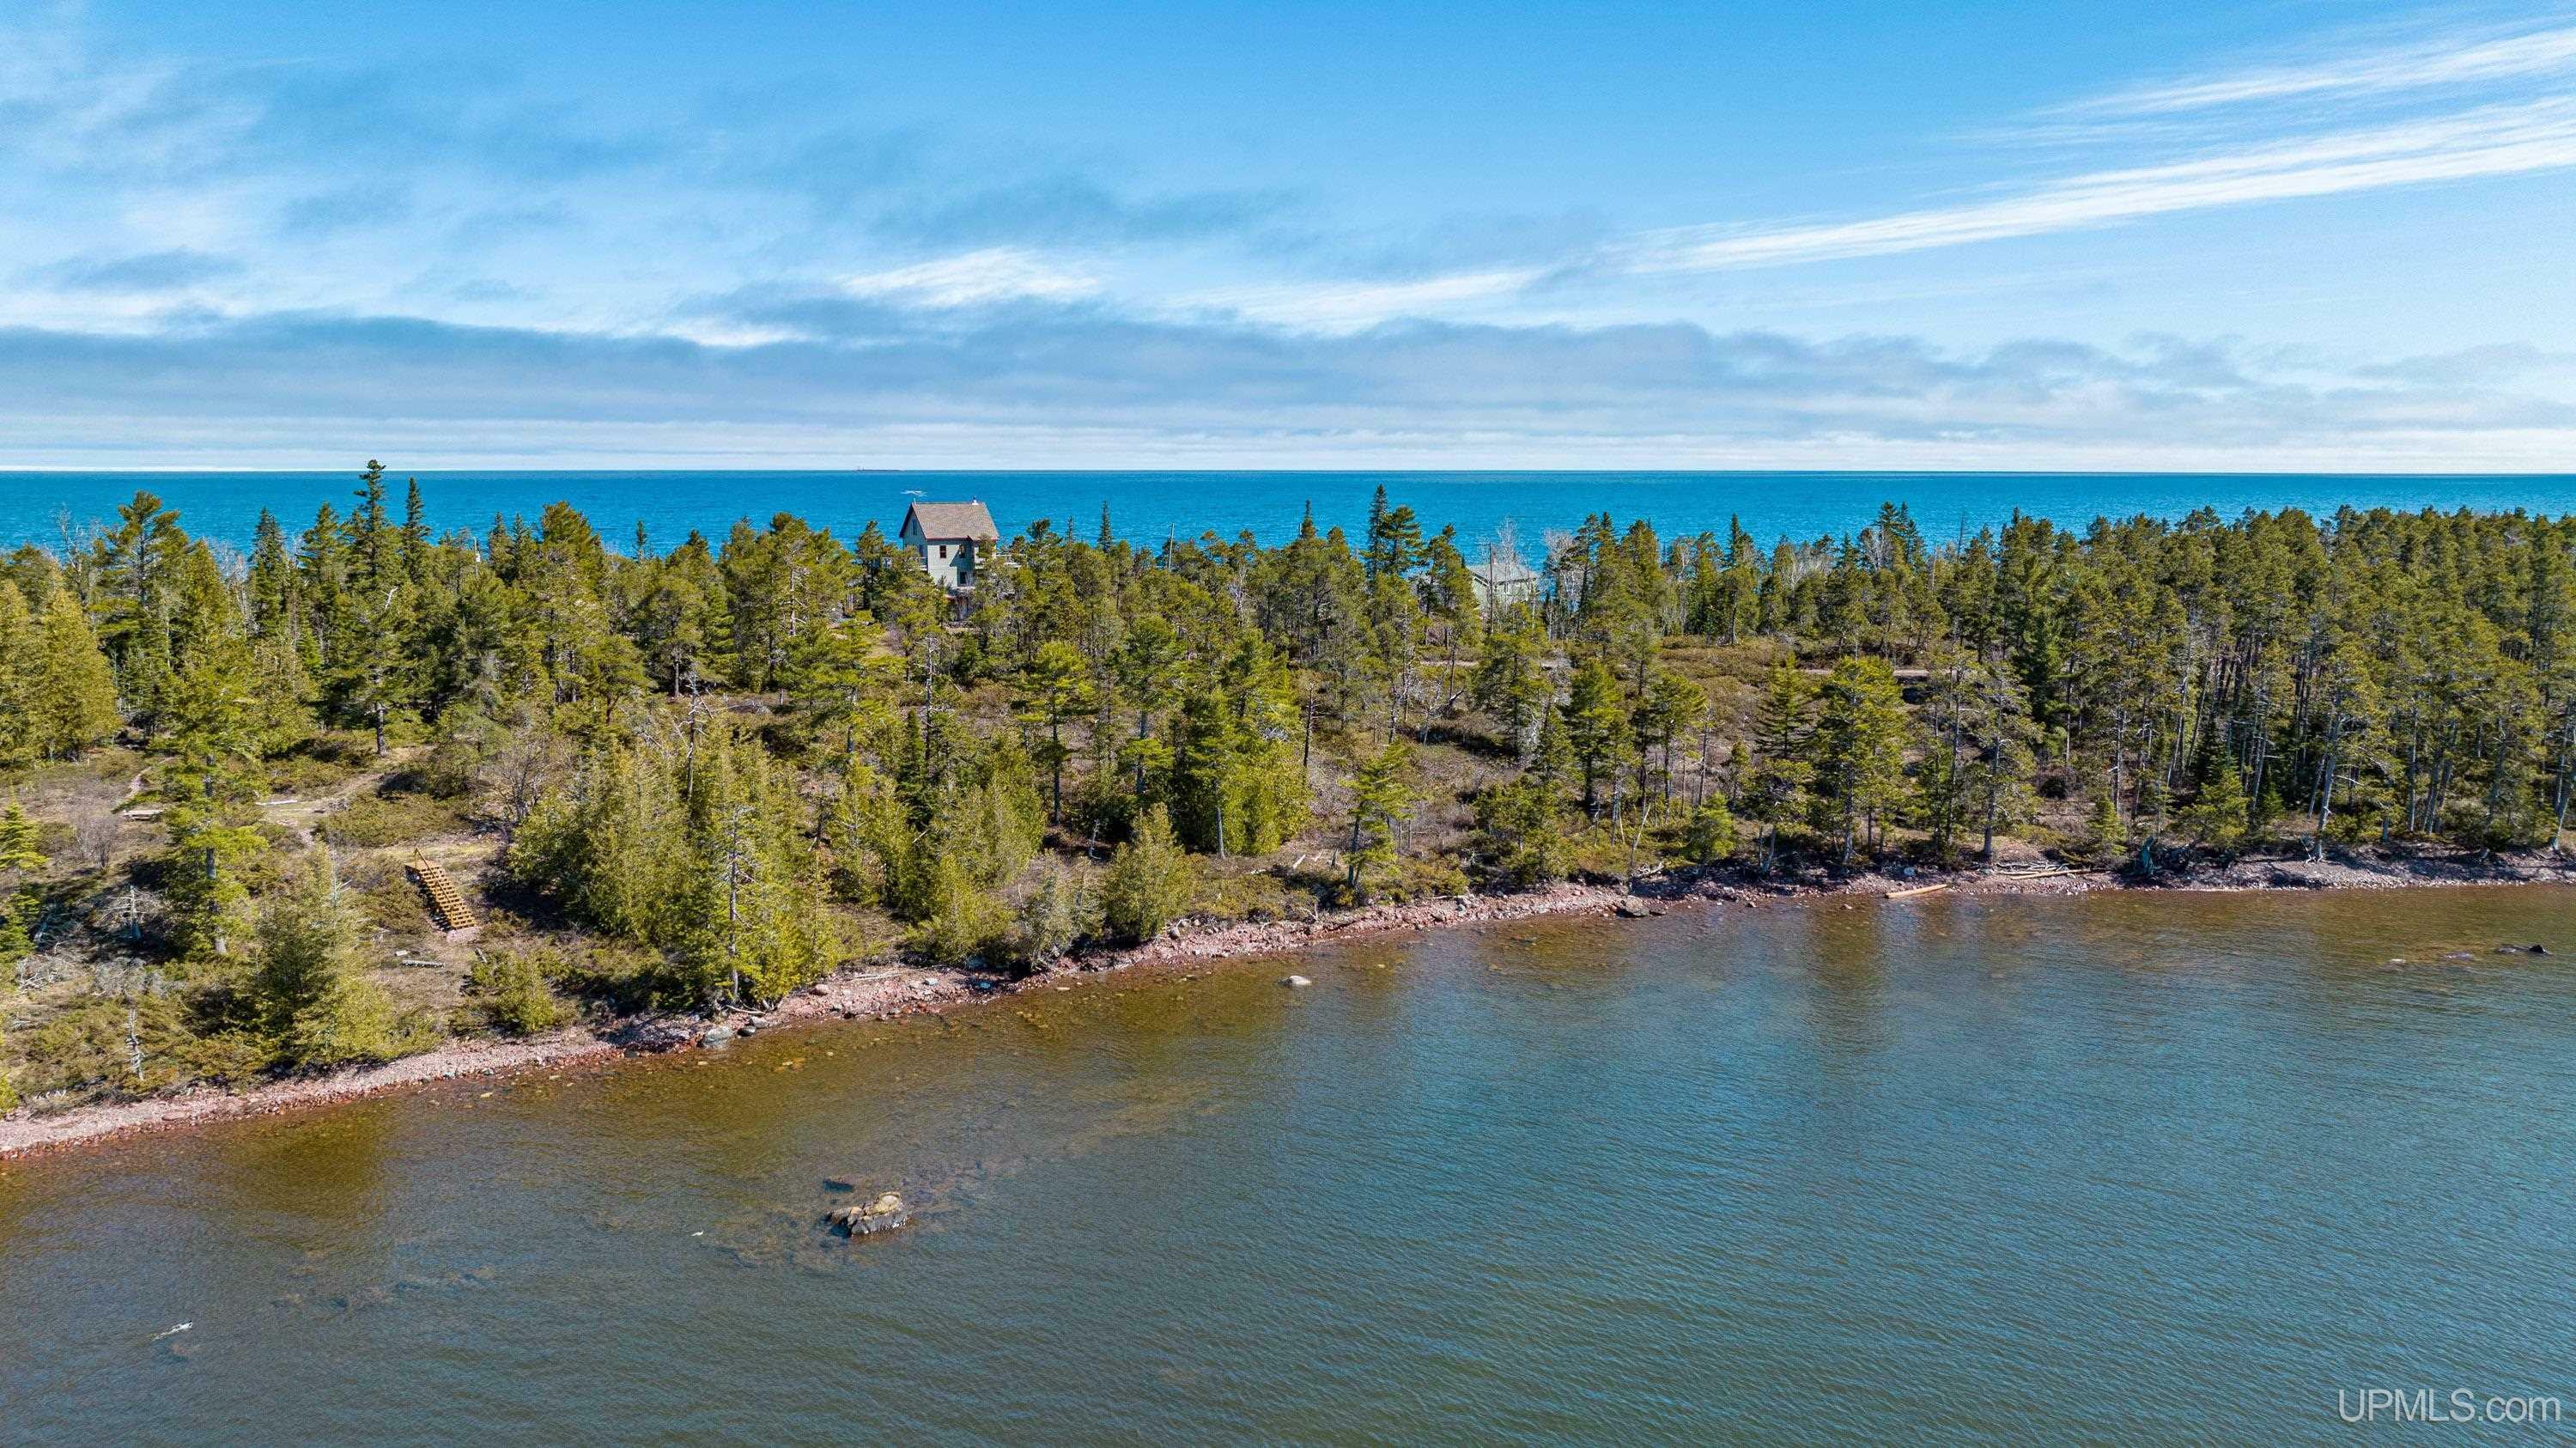 Property Photo:  13 14 15 Woodland Road Harbor View Drive Or Lighthouse Rd Pe  MI 49918 